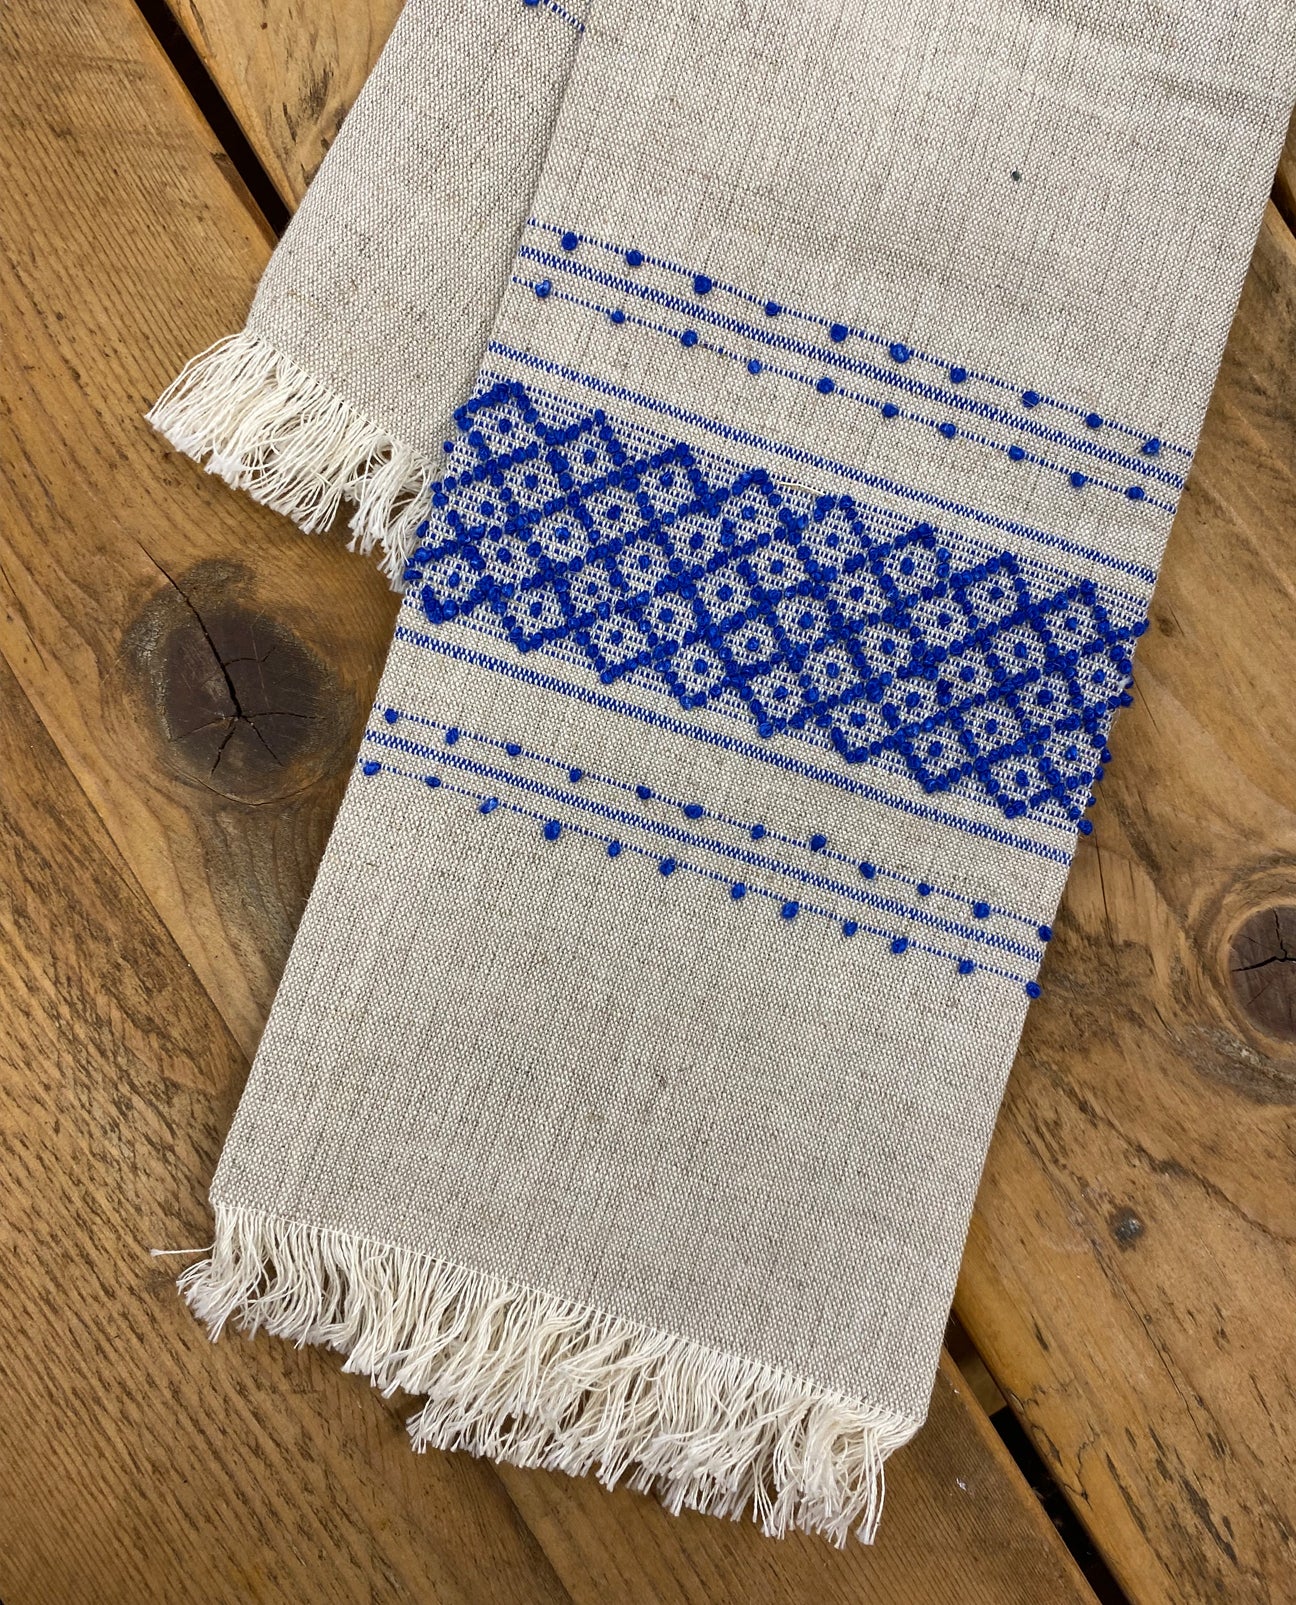 Large Linen Towel in Blue And White